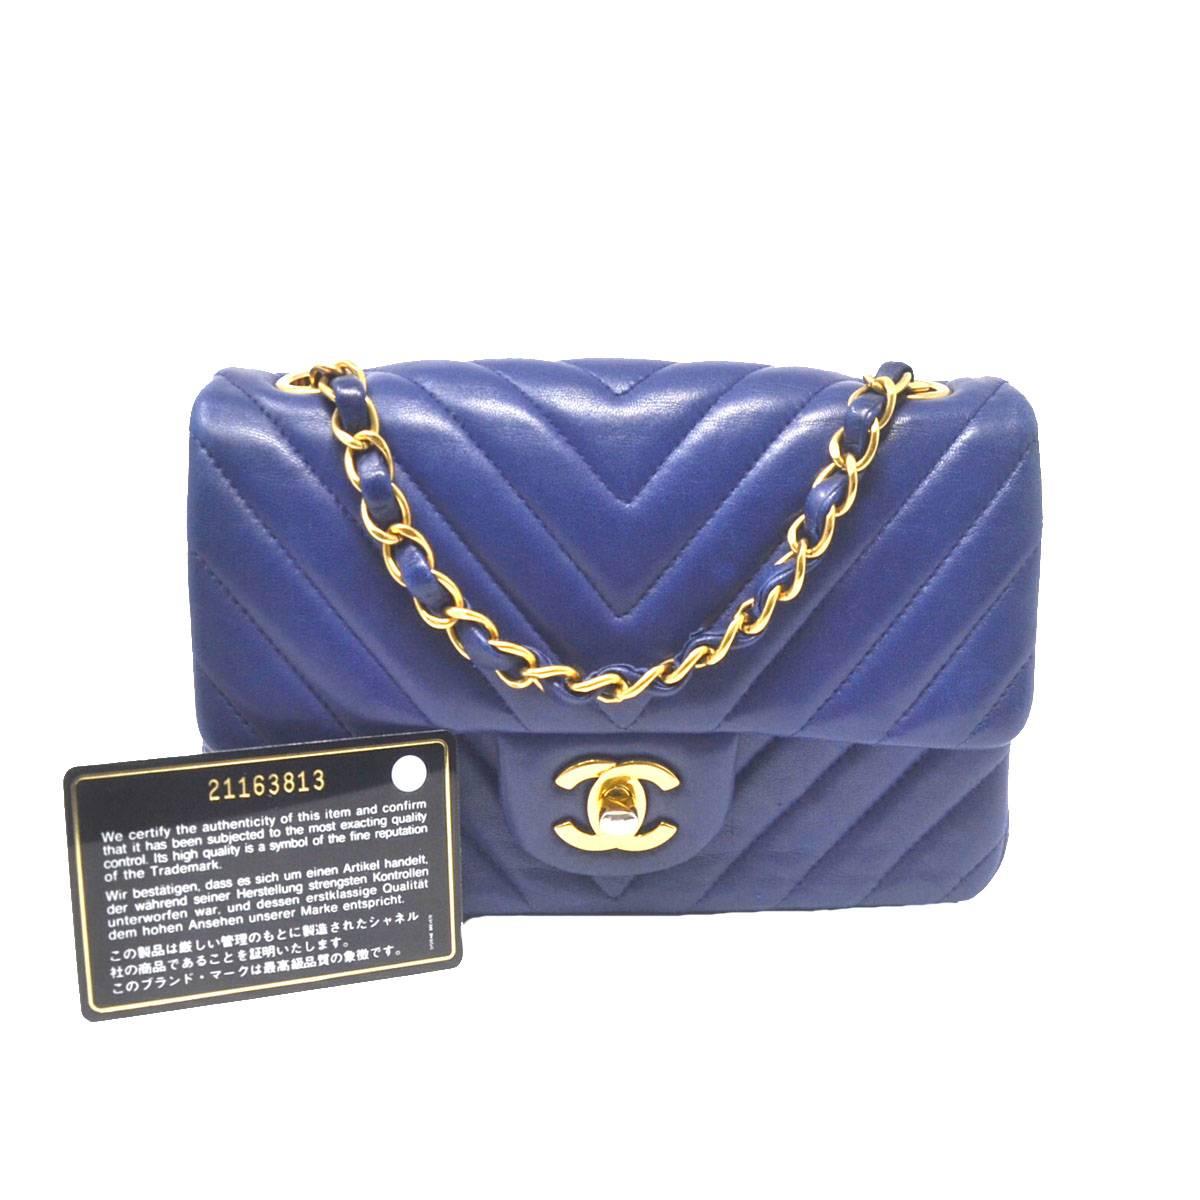 Company-Chanel
Model-Small Flap Cheveron
Color-Blue
Date Code-168550048
MaterialLeather
Measurements-8